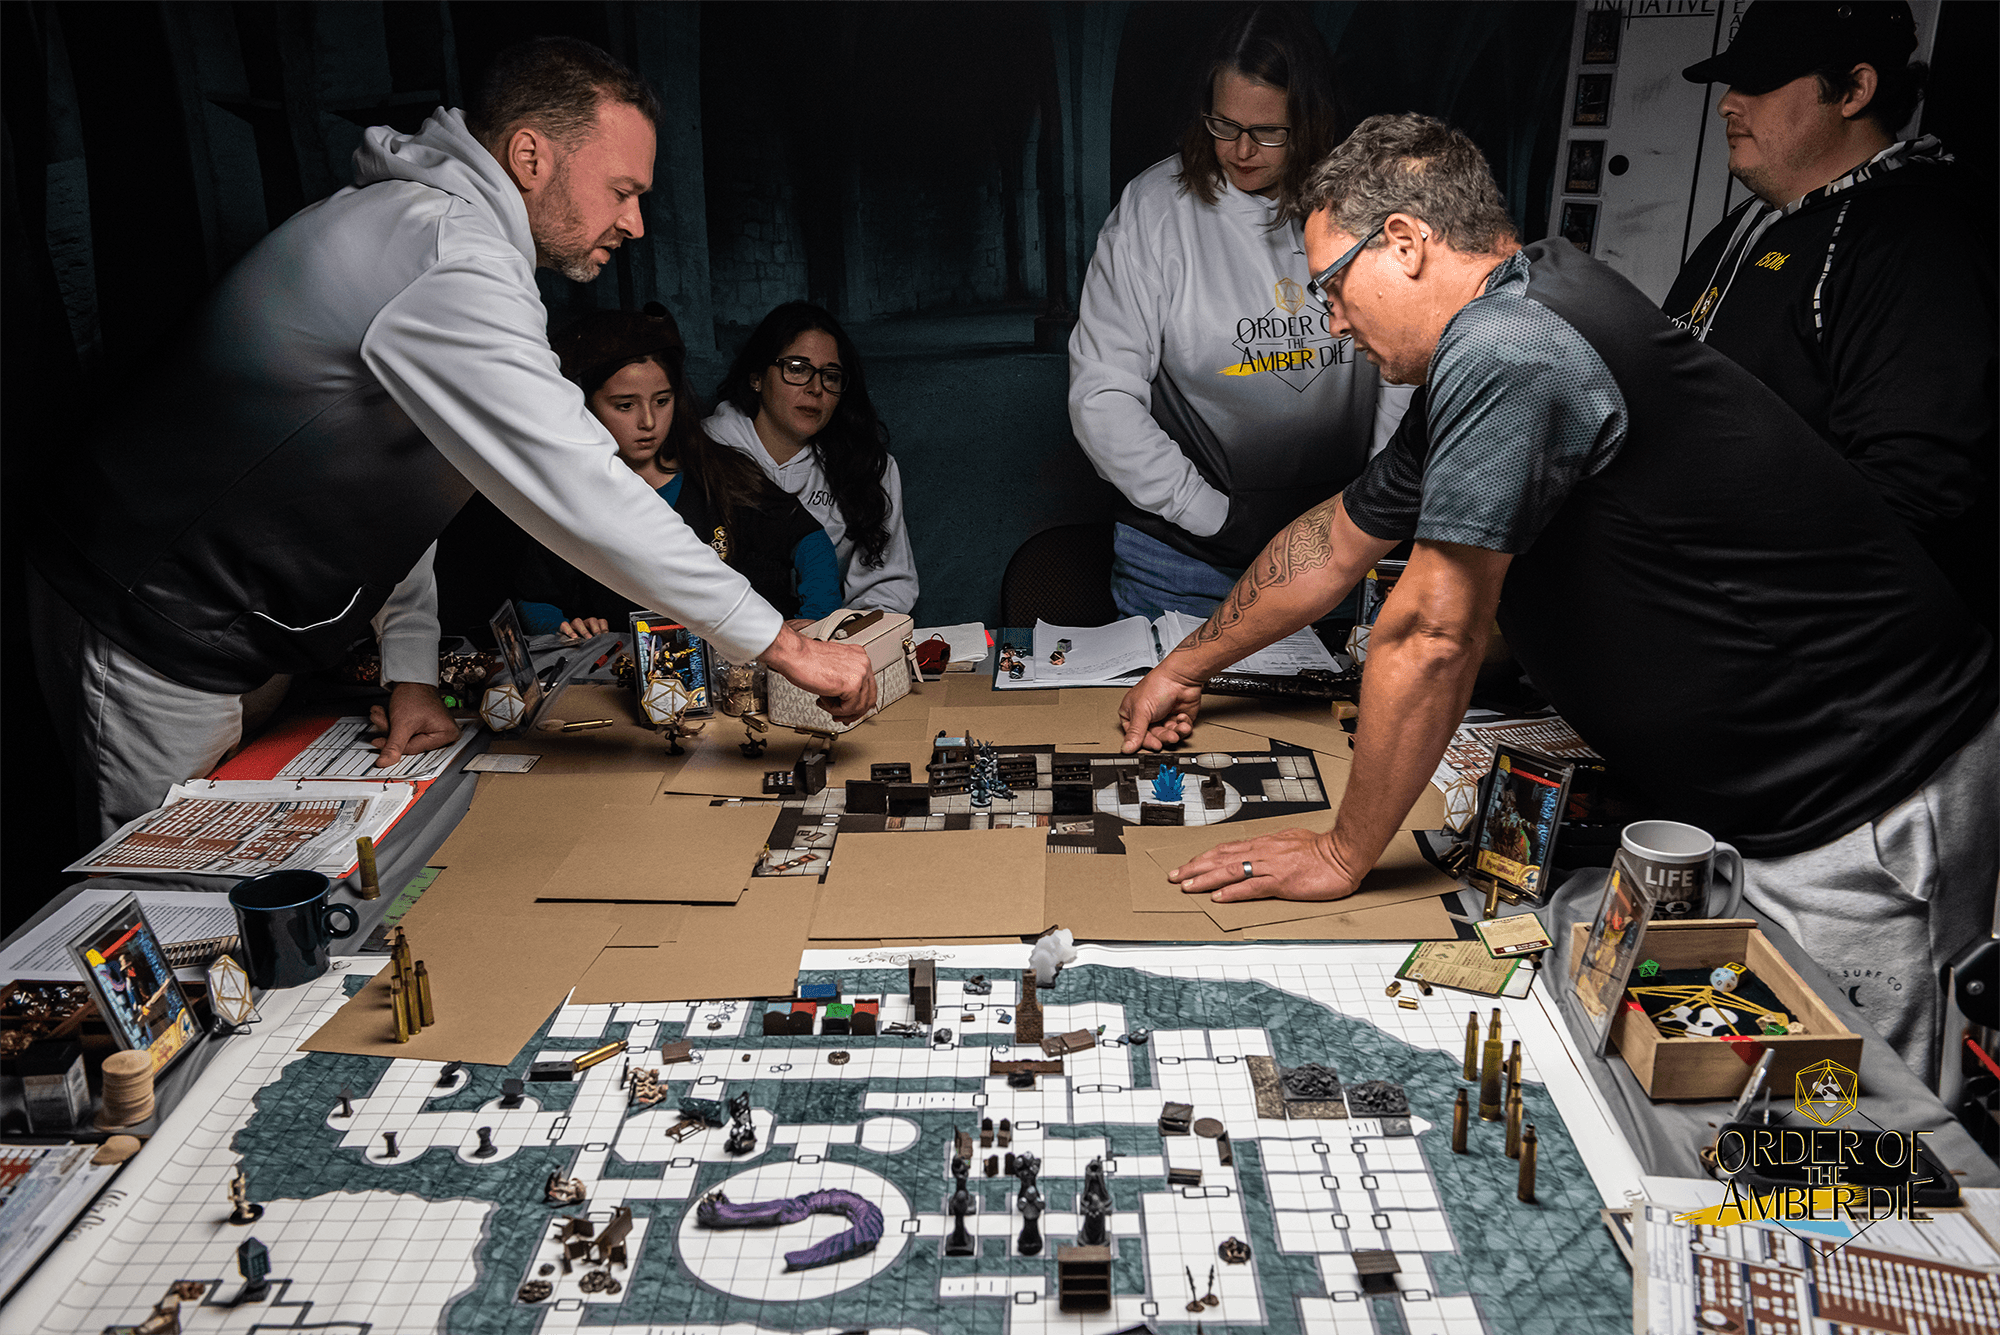 Players all standing and leaning over a table covered in maps and miniatures